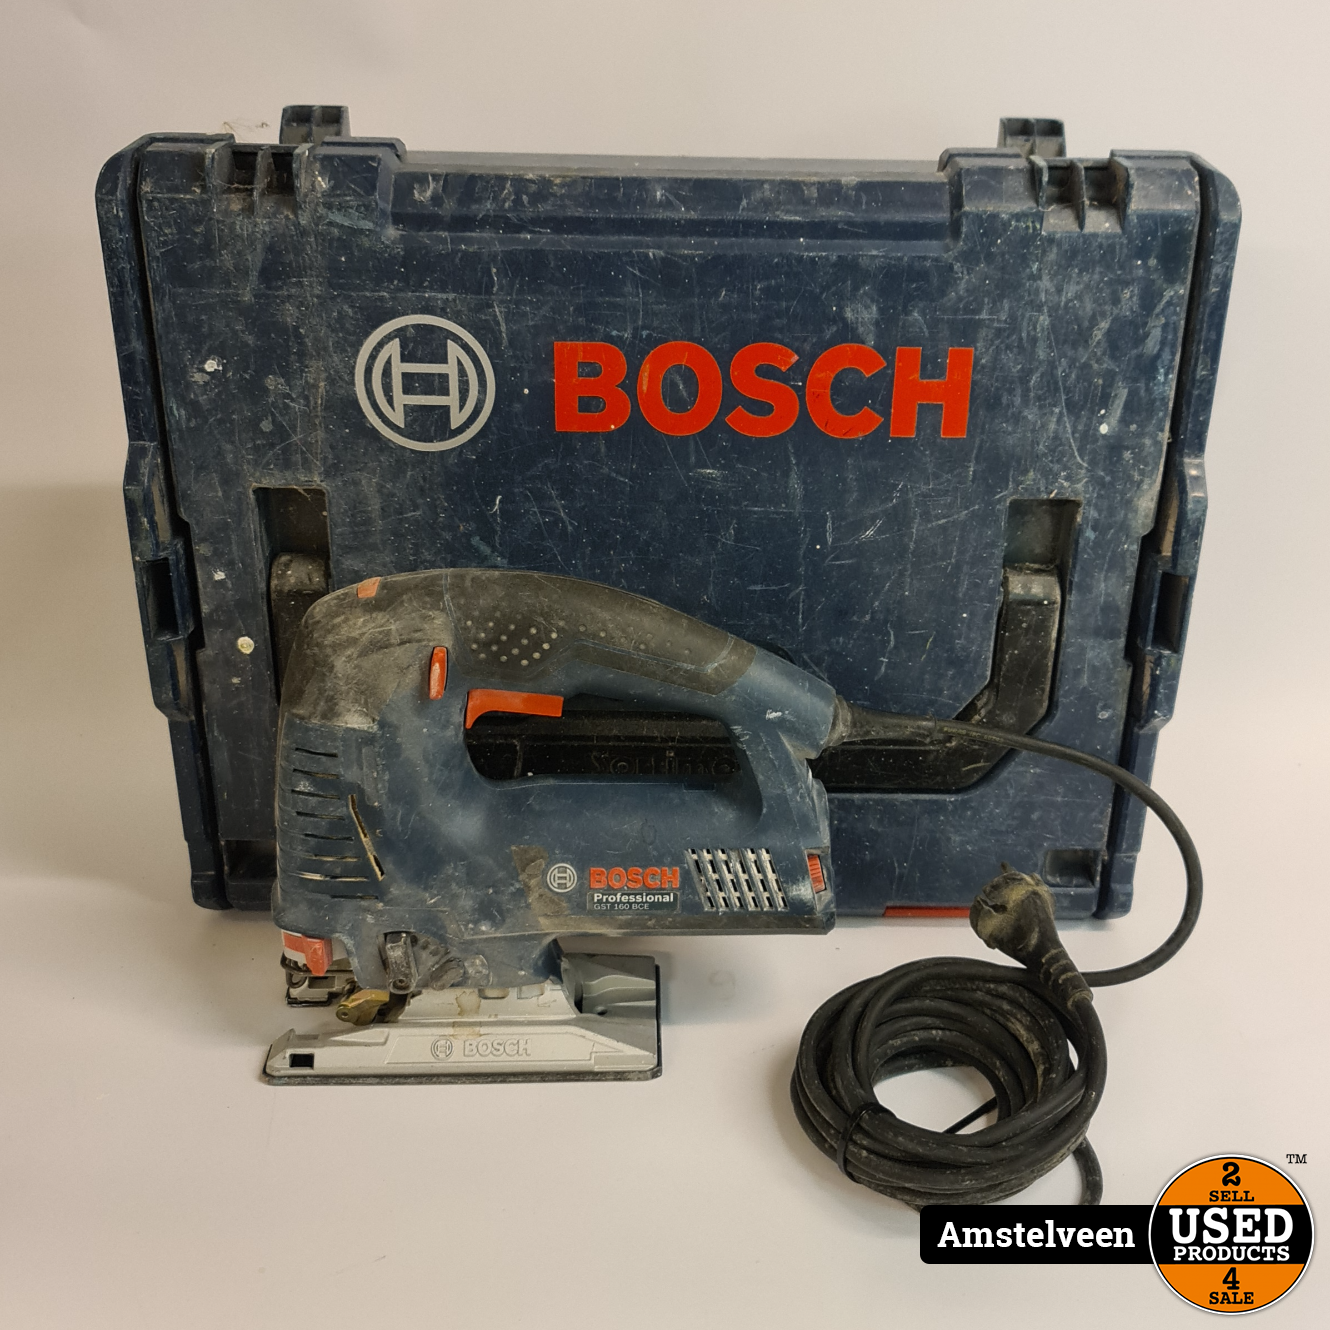 Bosch GST150BCE | Koffer - Used Products Amstelveen